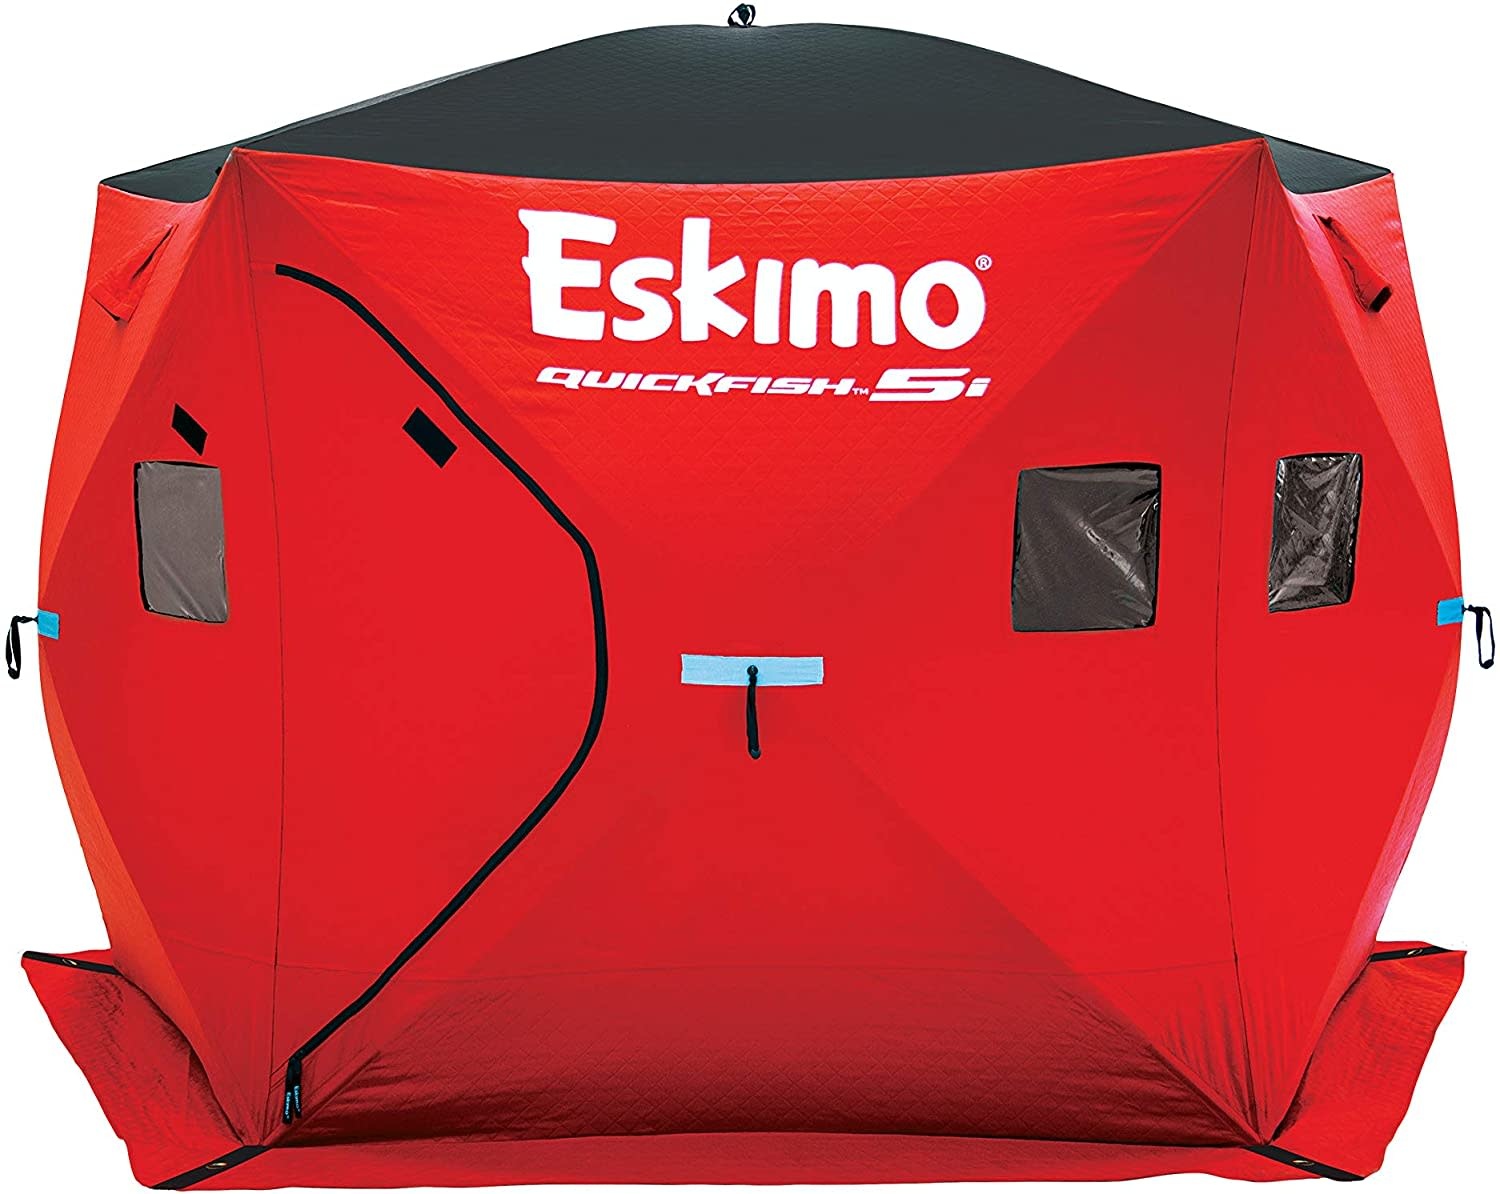 Eskimo 24105 Quickfish 5i Insulated Pop-Up Ice Shelter - Mountain Man  Outdoors